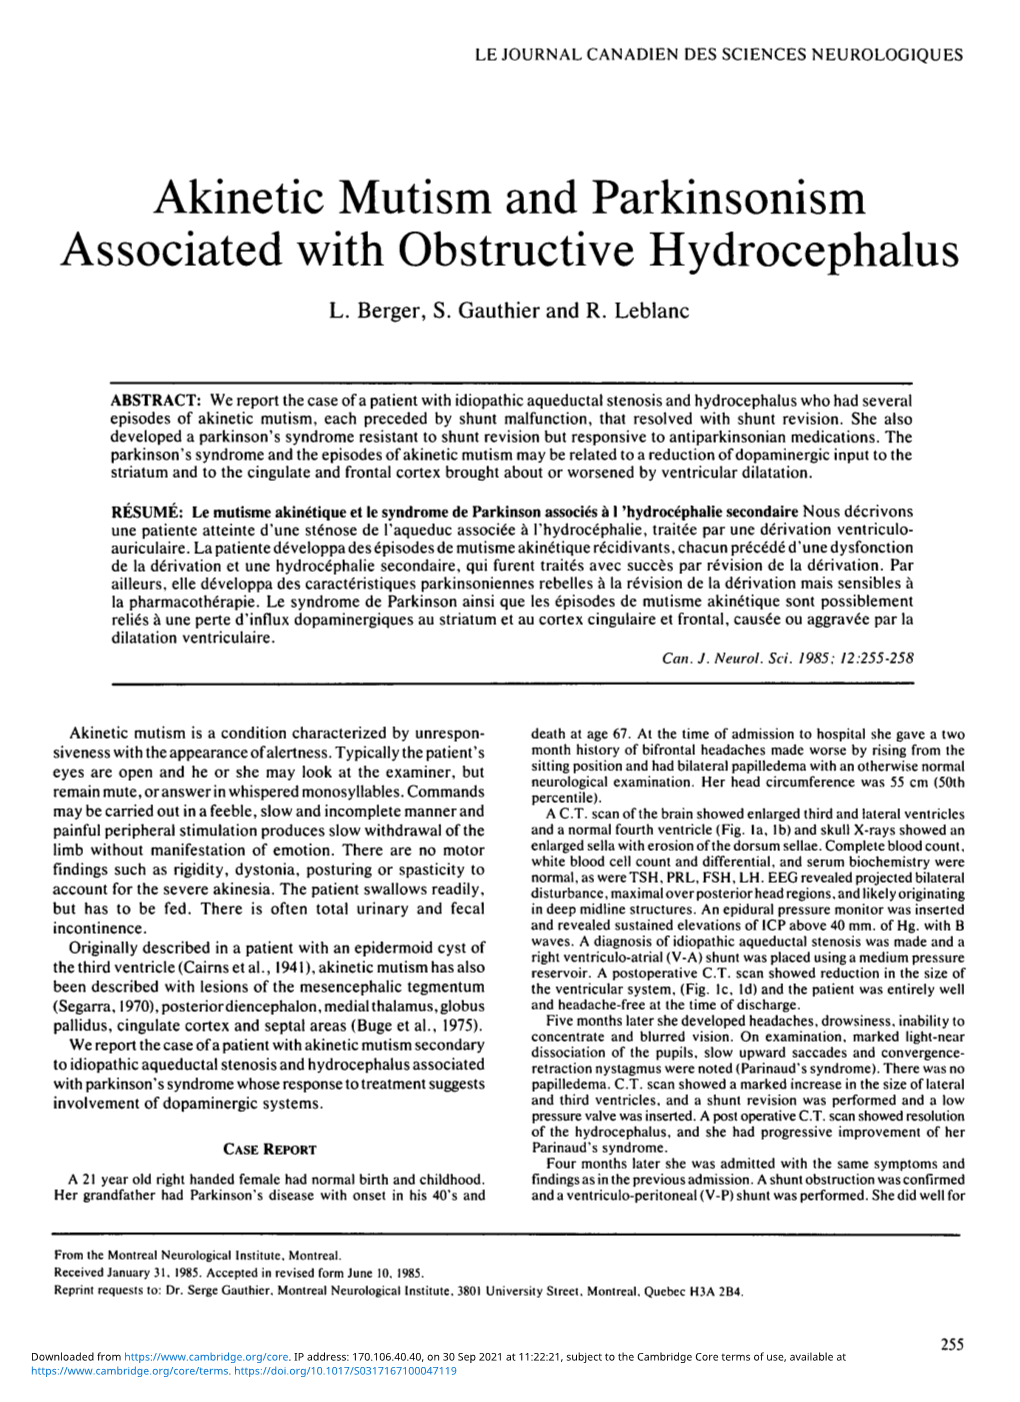 Akinetic Mutism and Parkinsonism Associated with Obstructive Hydrocephalus L